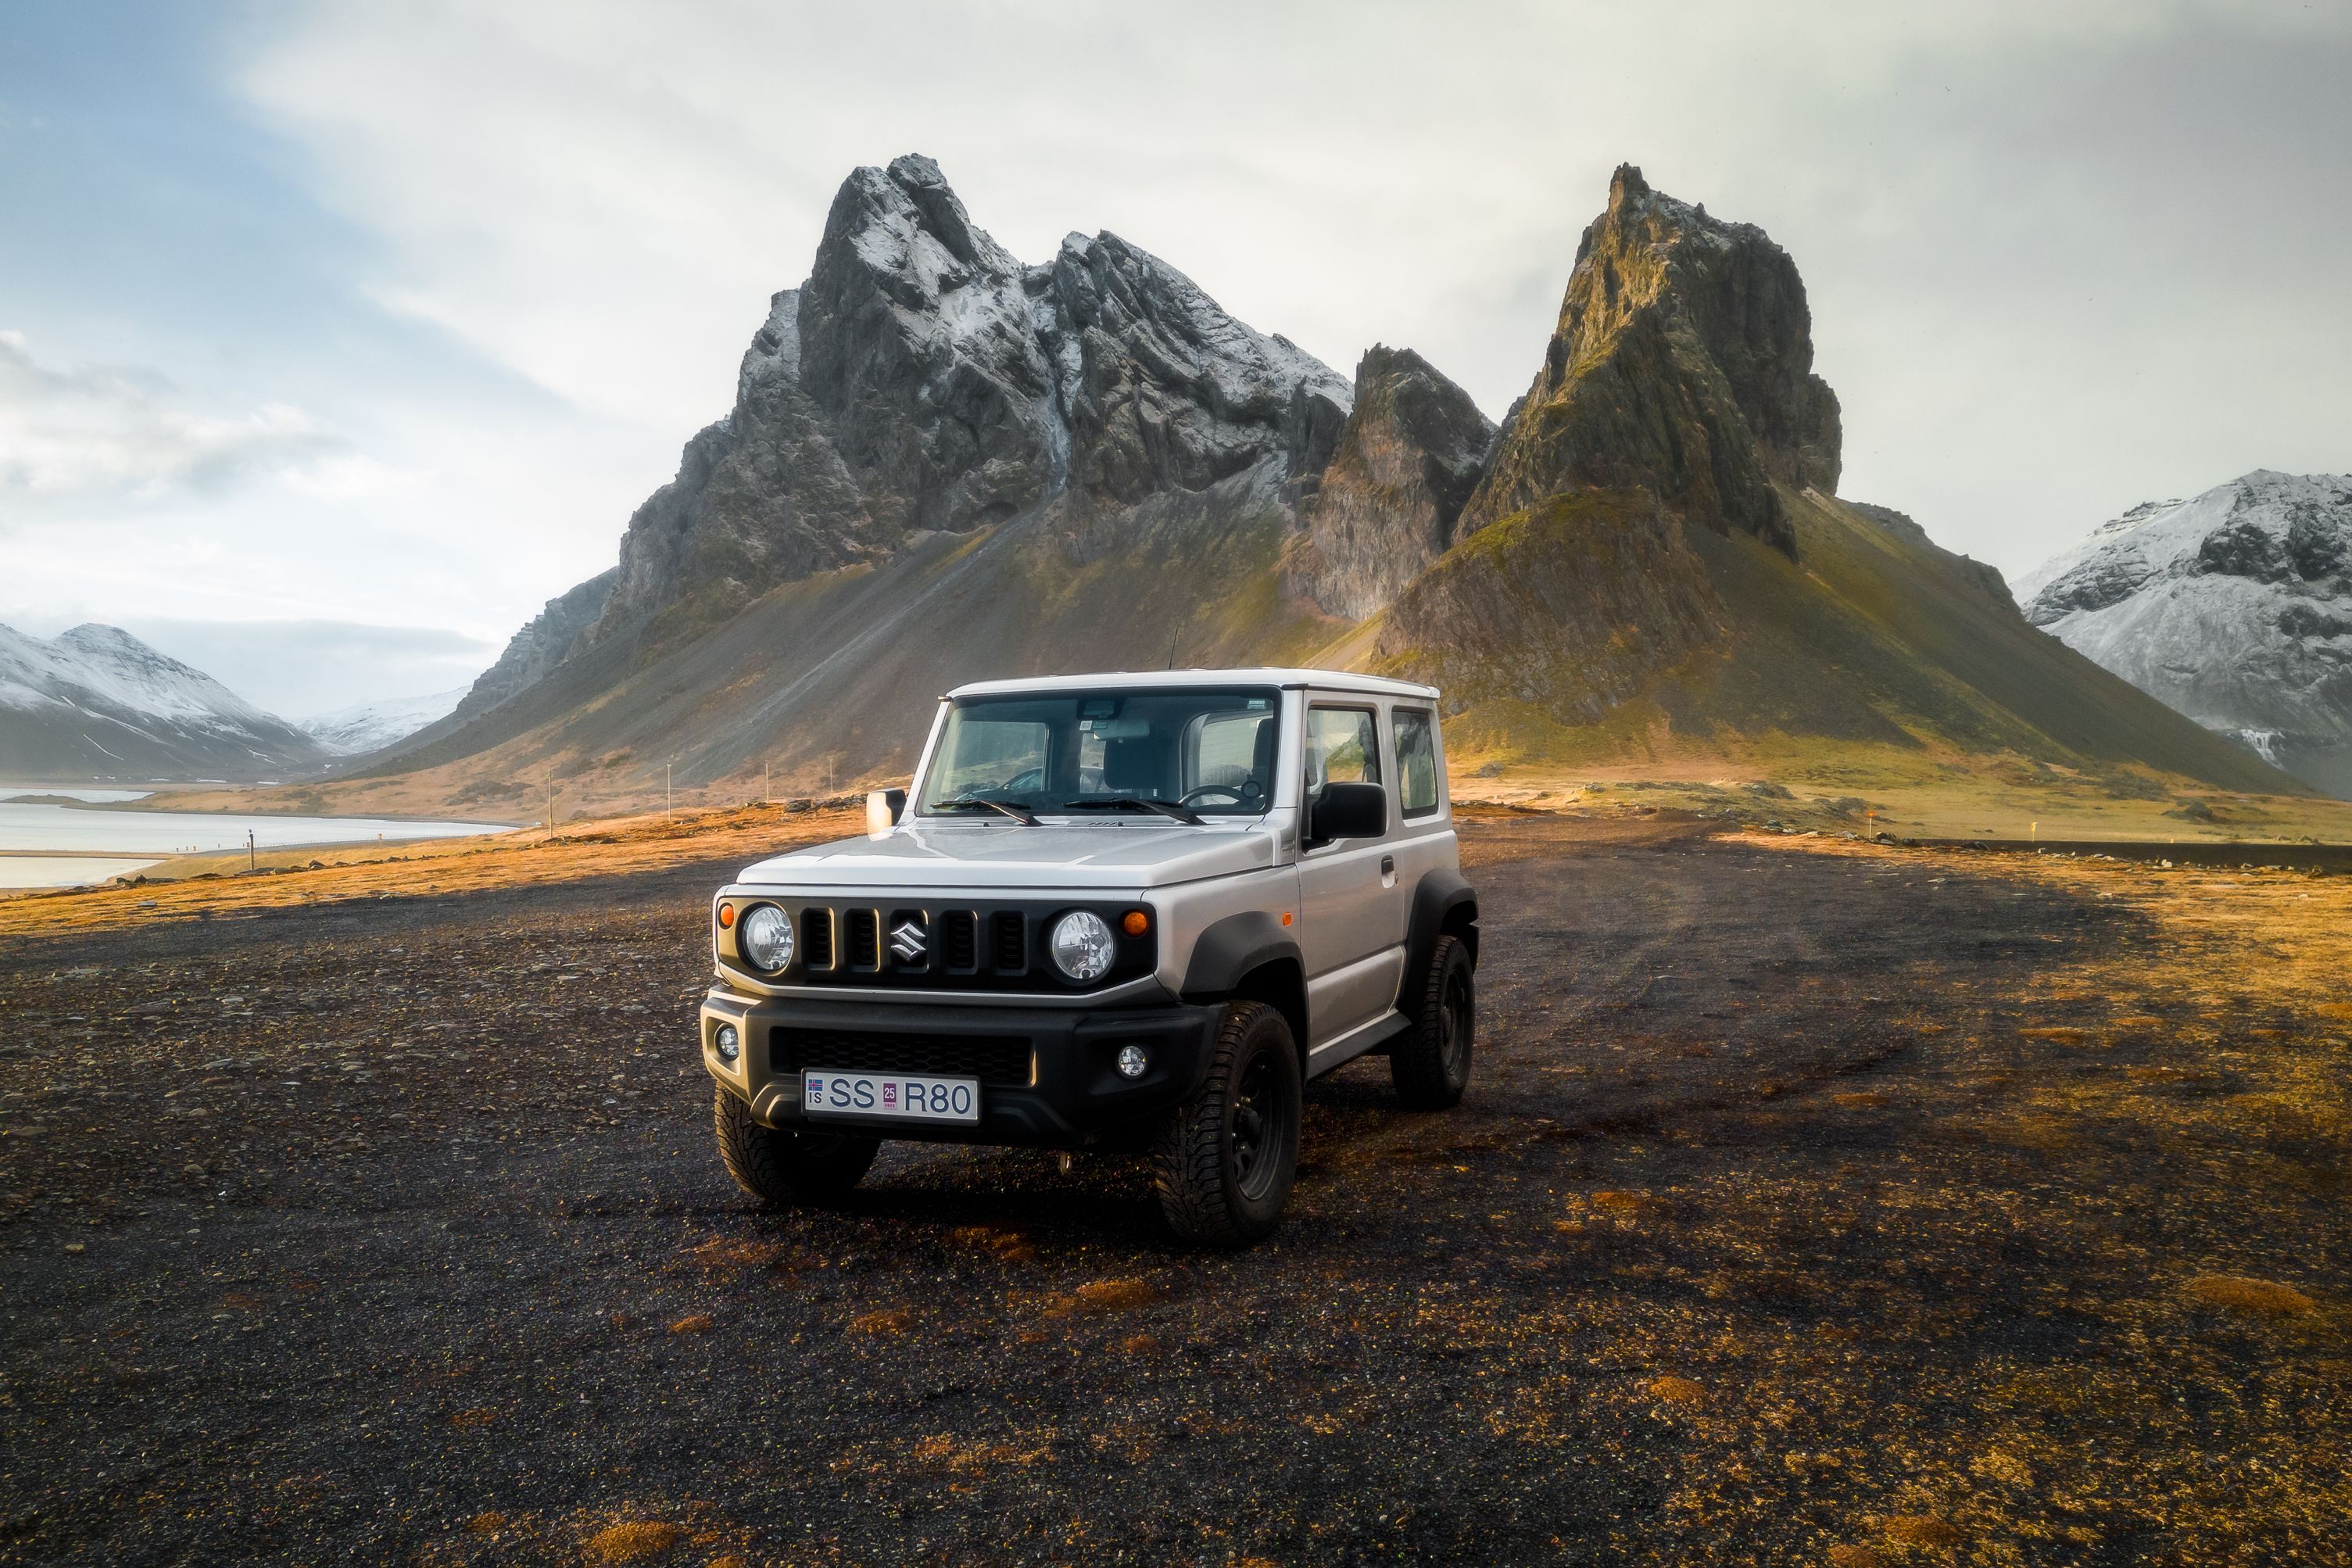 Iceland's scenic routes – a driver's paradise, courtesy of a local Iceland car rental company.